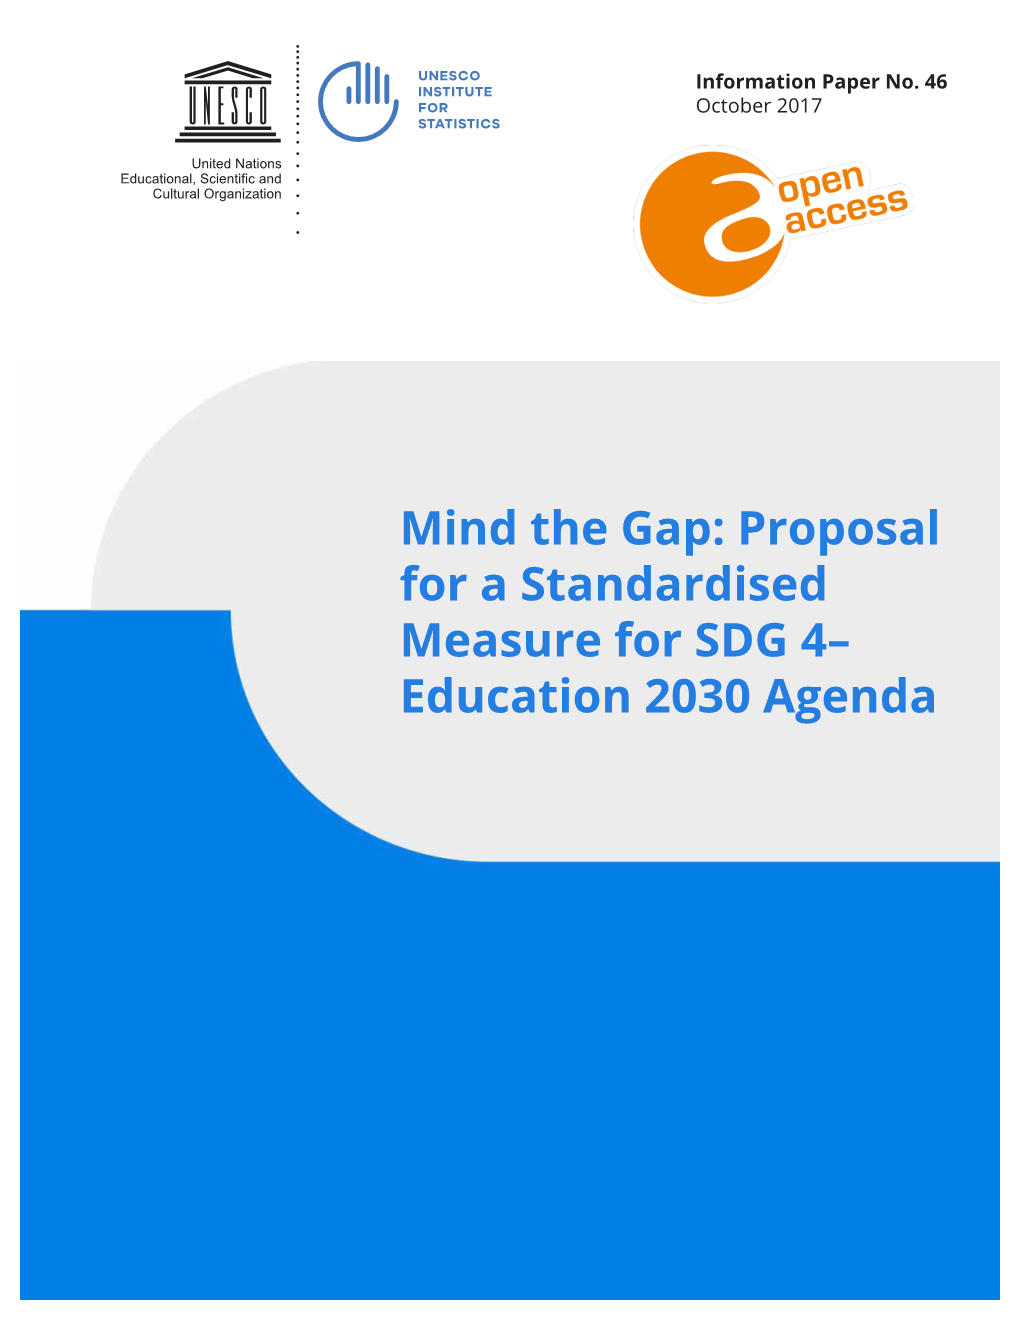 Mind the Gap: Proposal for a Standardised Measure for SDG 4